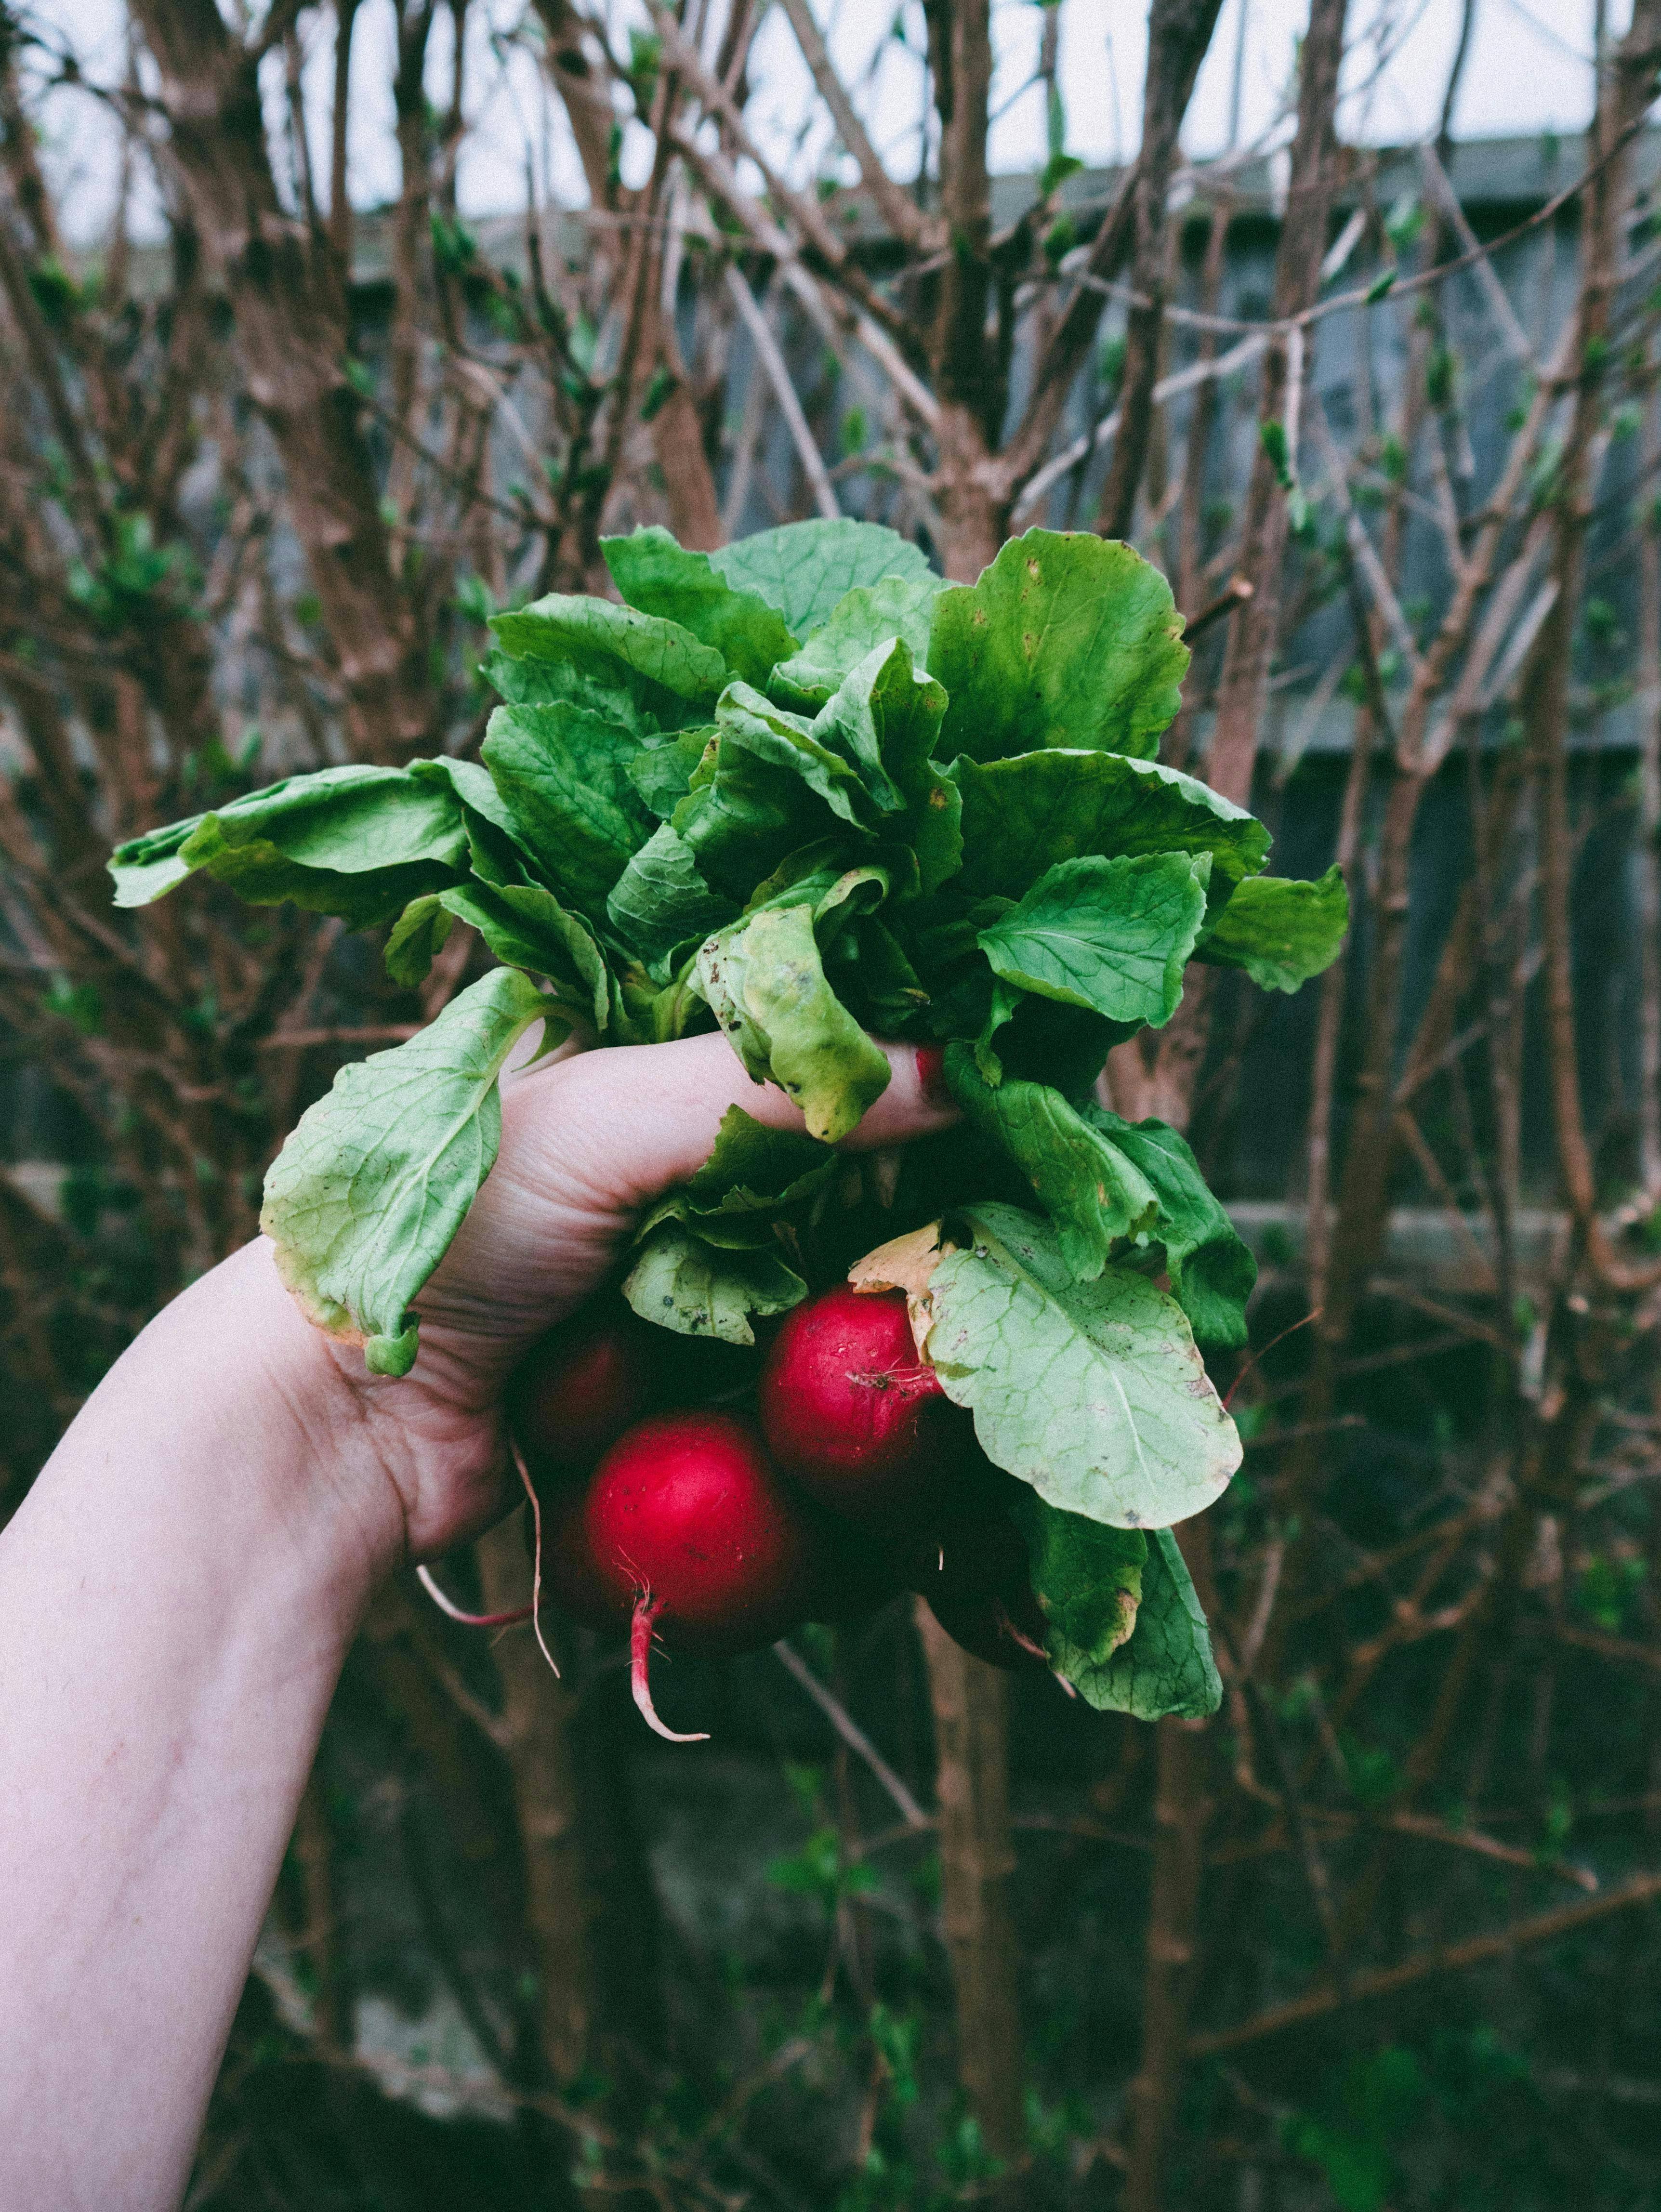 A hand pulls radishes from a vegetable garden